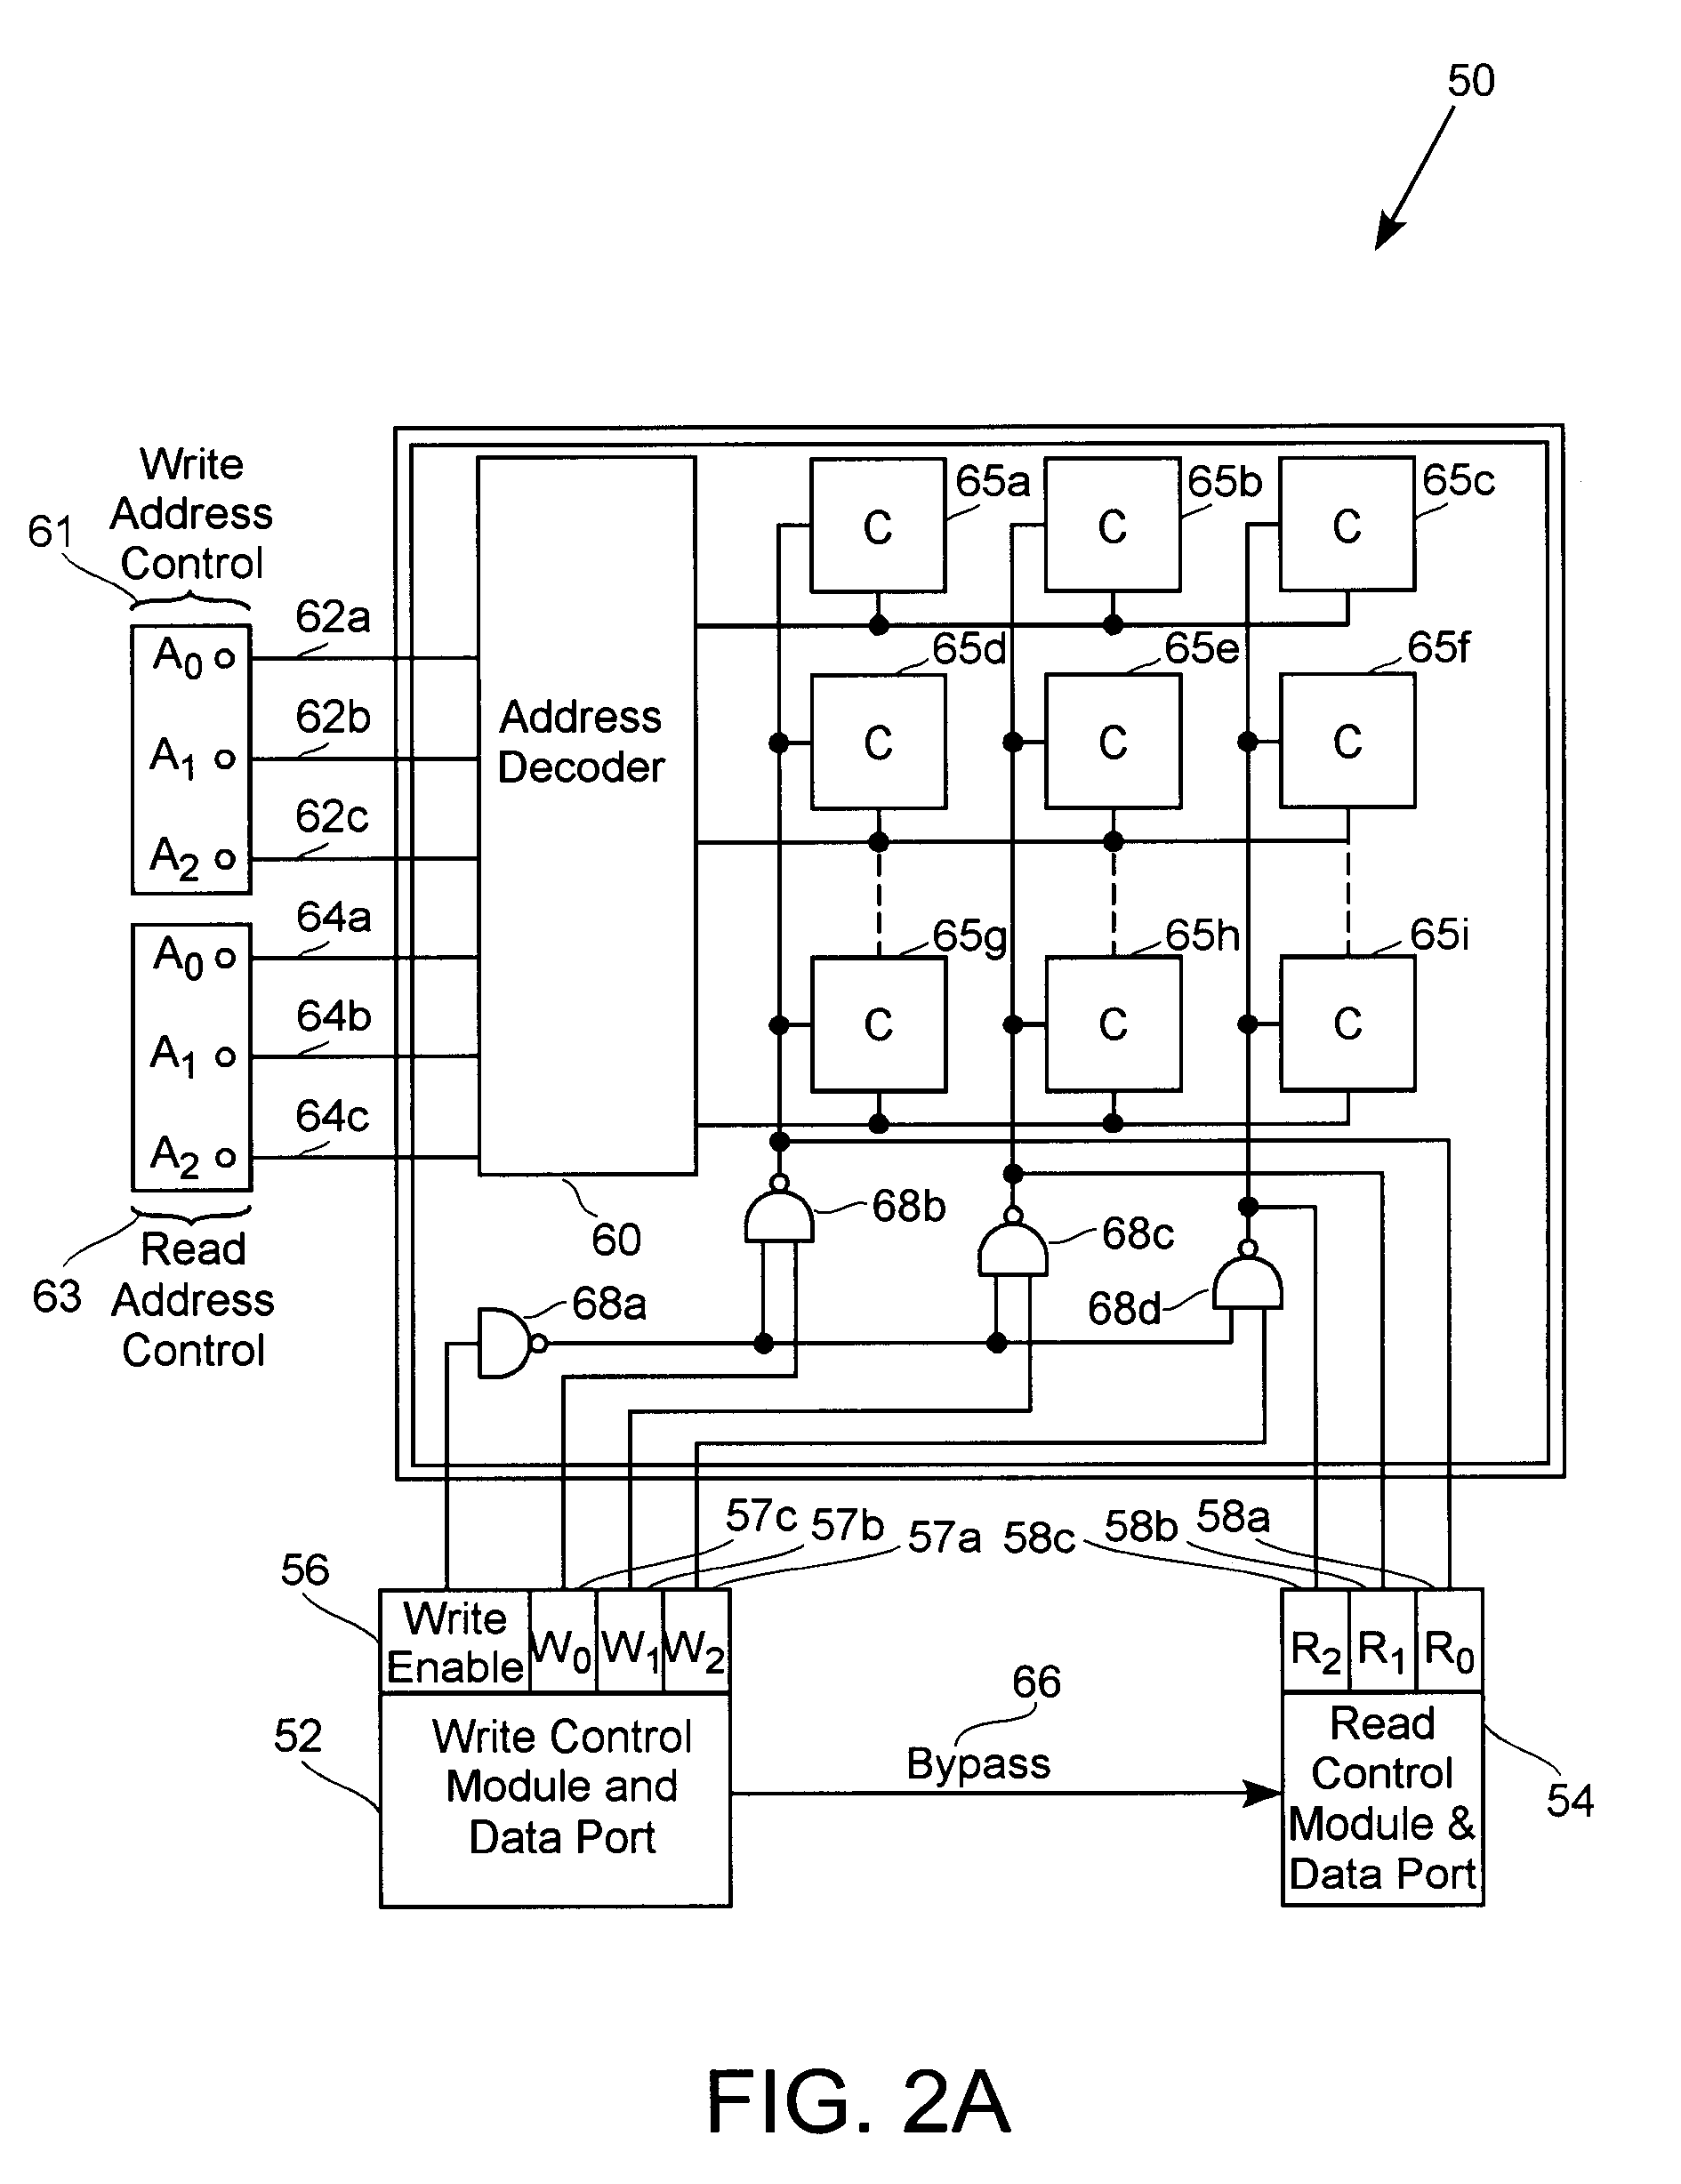 System and method for implementing memory testing in a SRAM unit